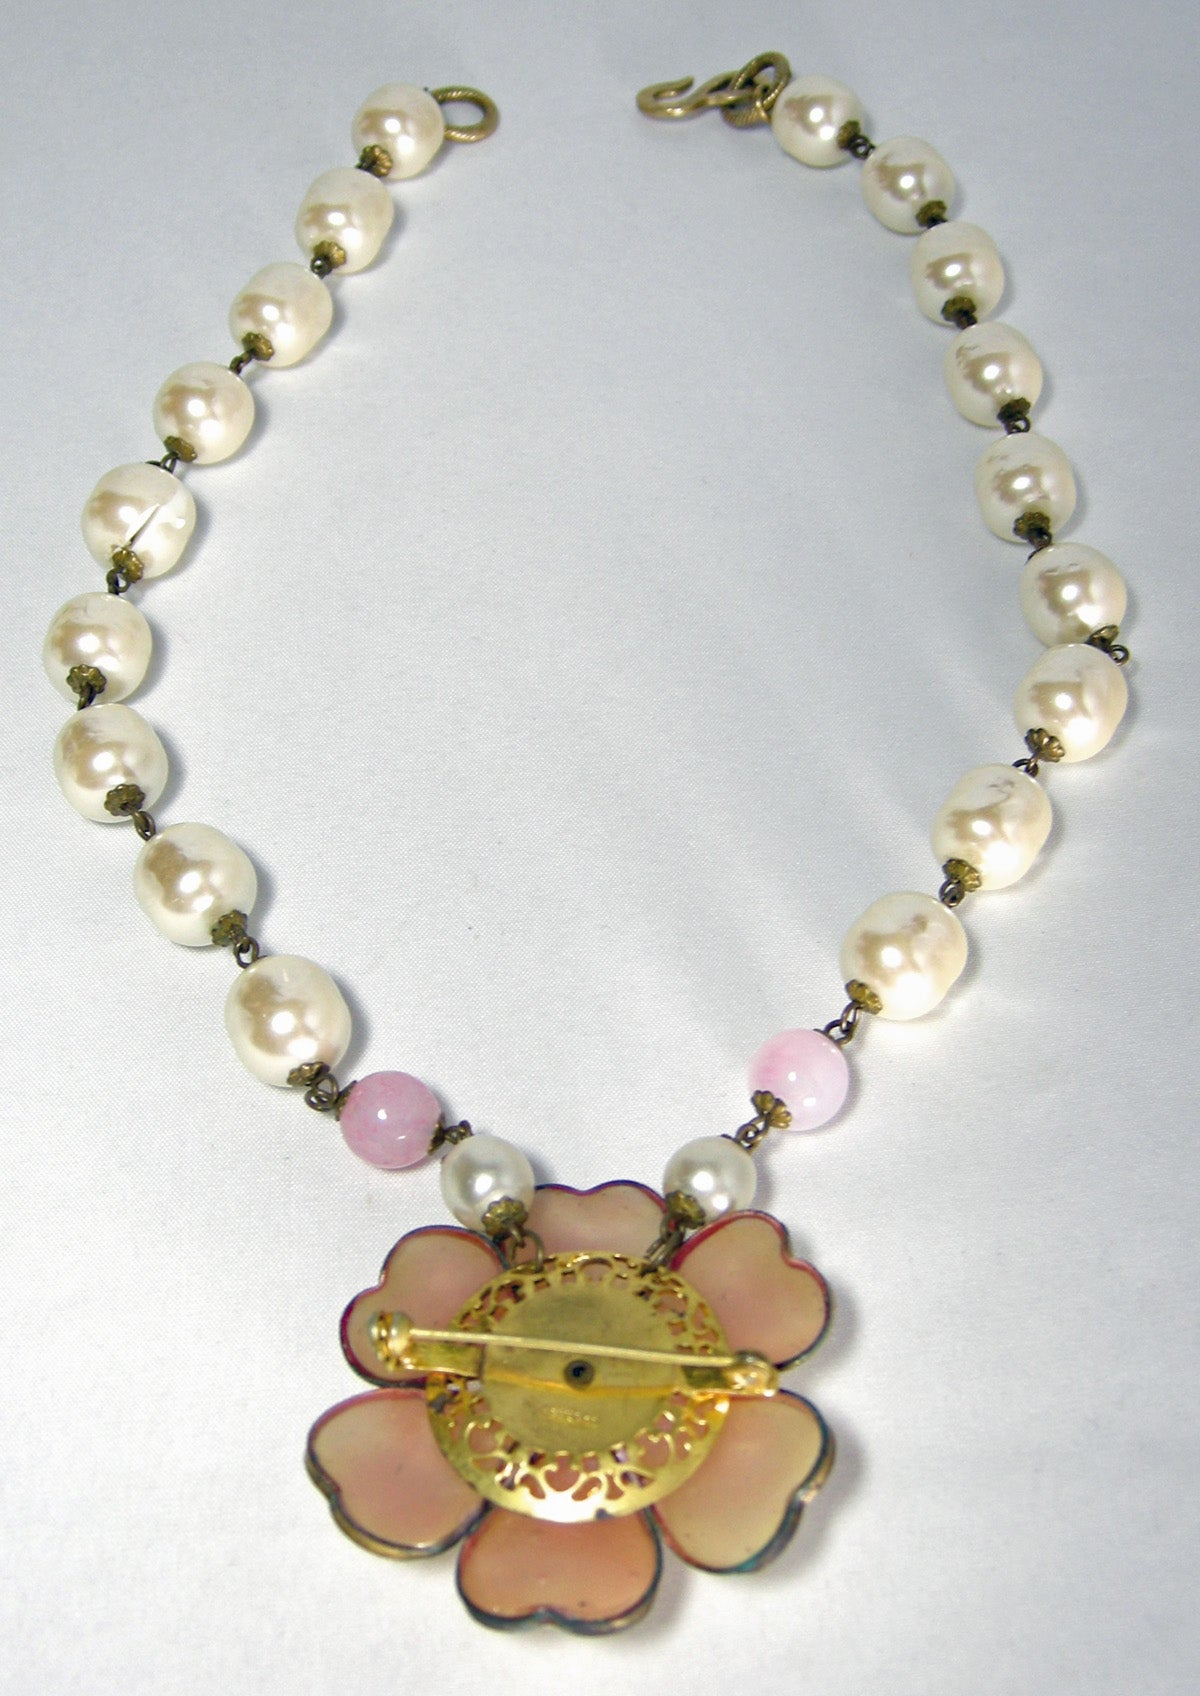 EARLY VINTAGE CHANEL PEARL NECKLACE & GRIPOIX POURED GLASS FLOWER